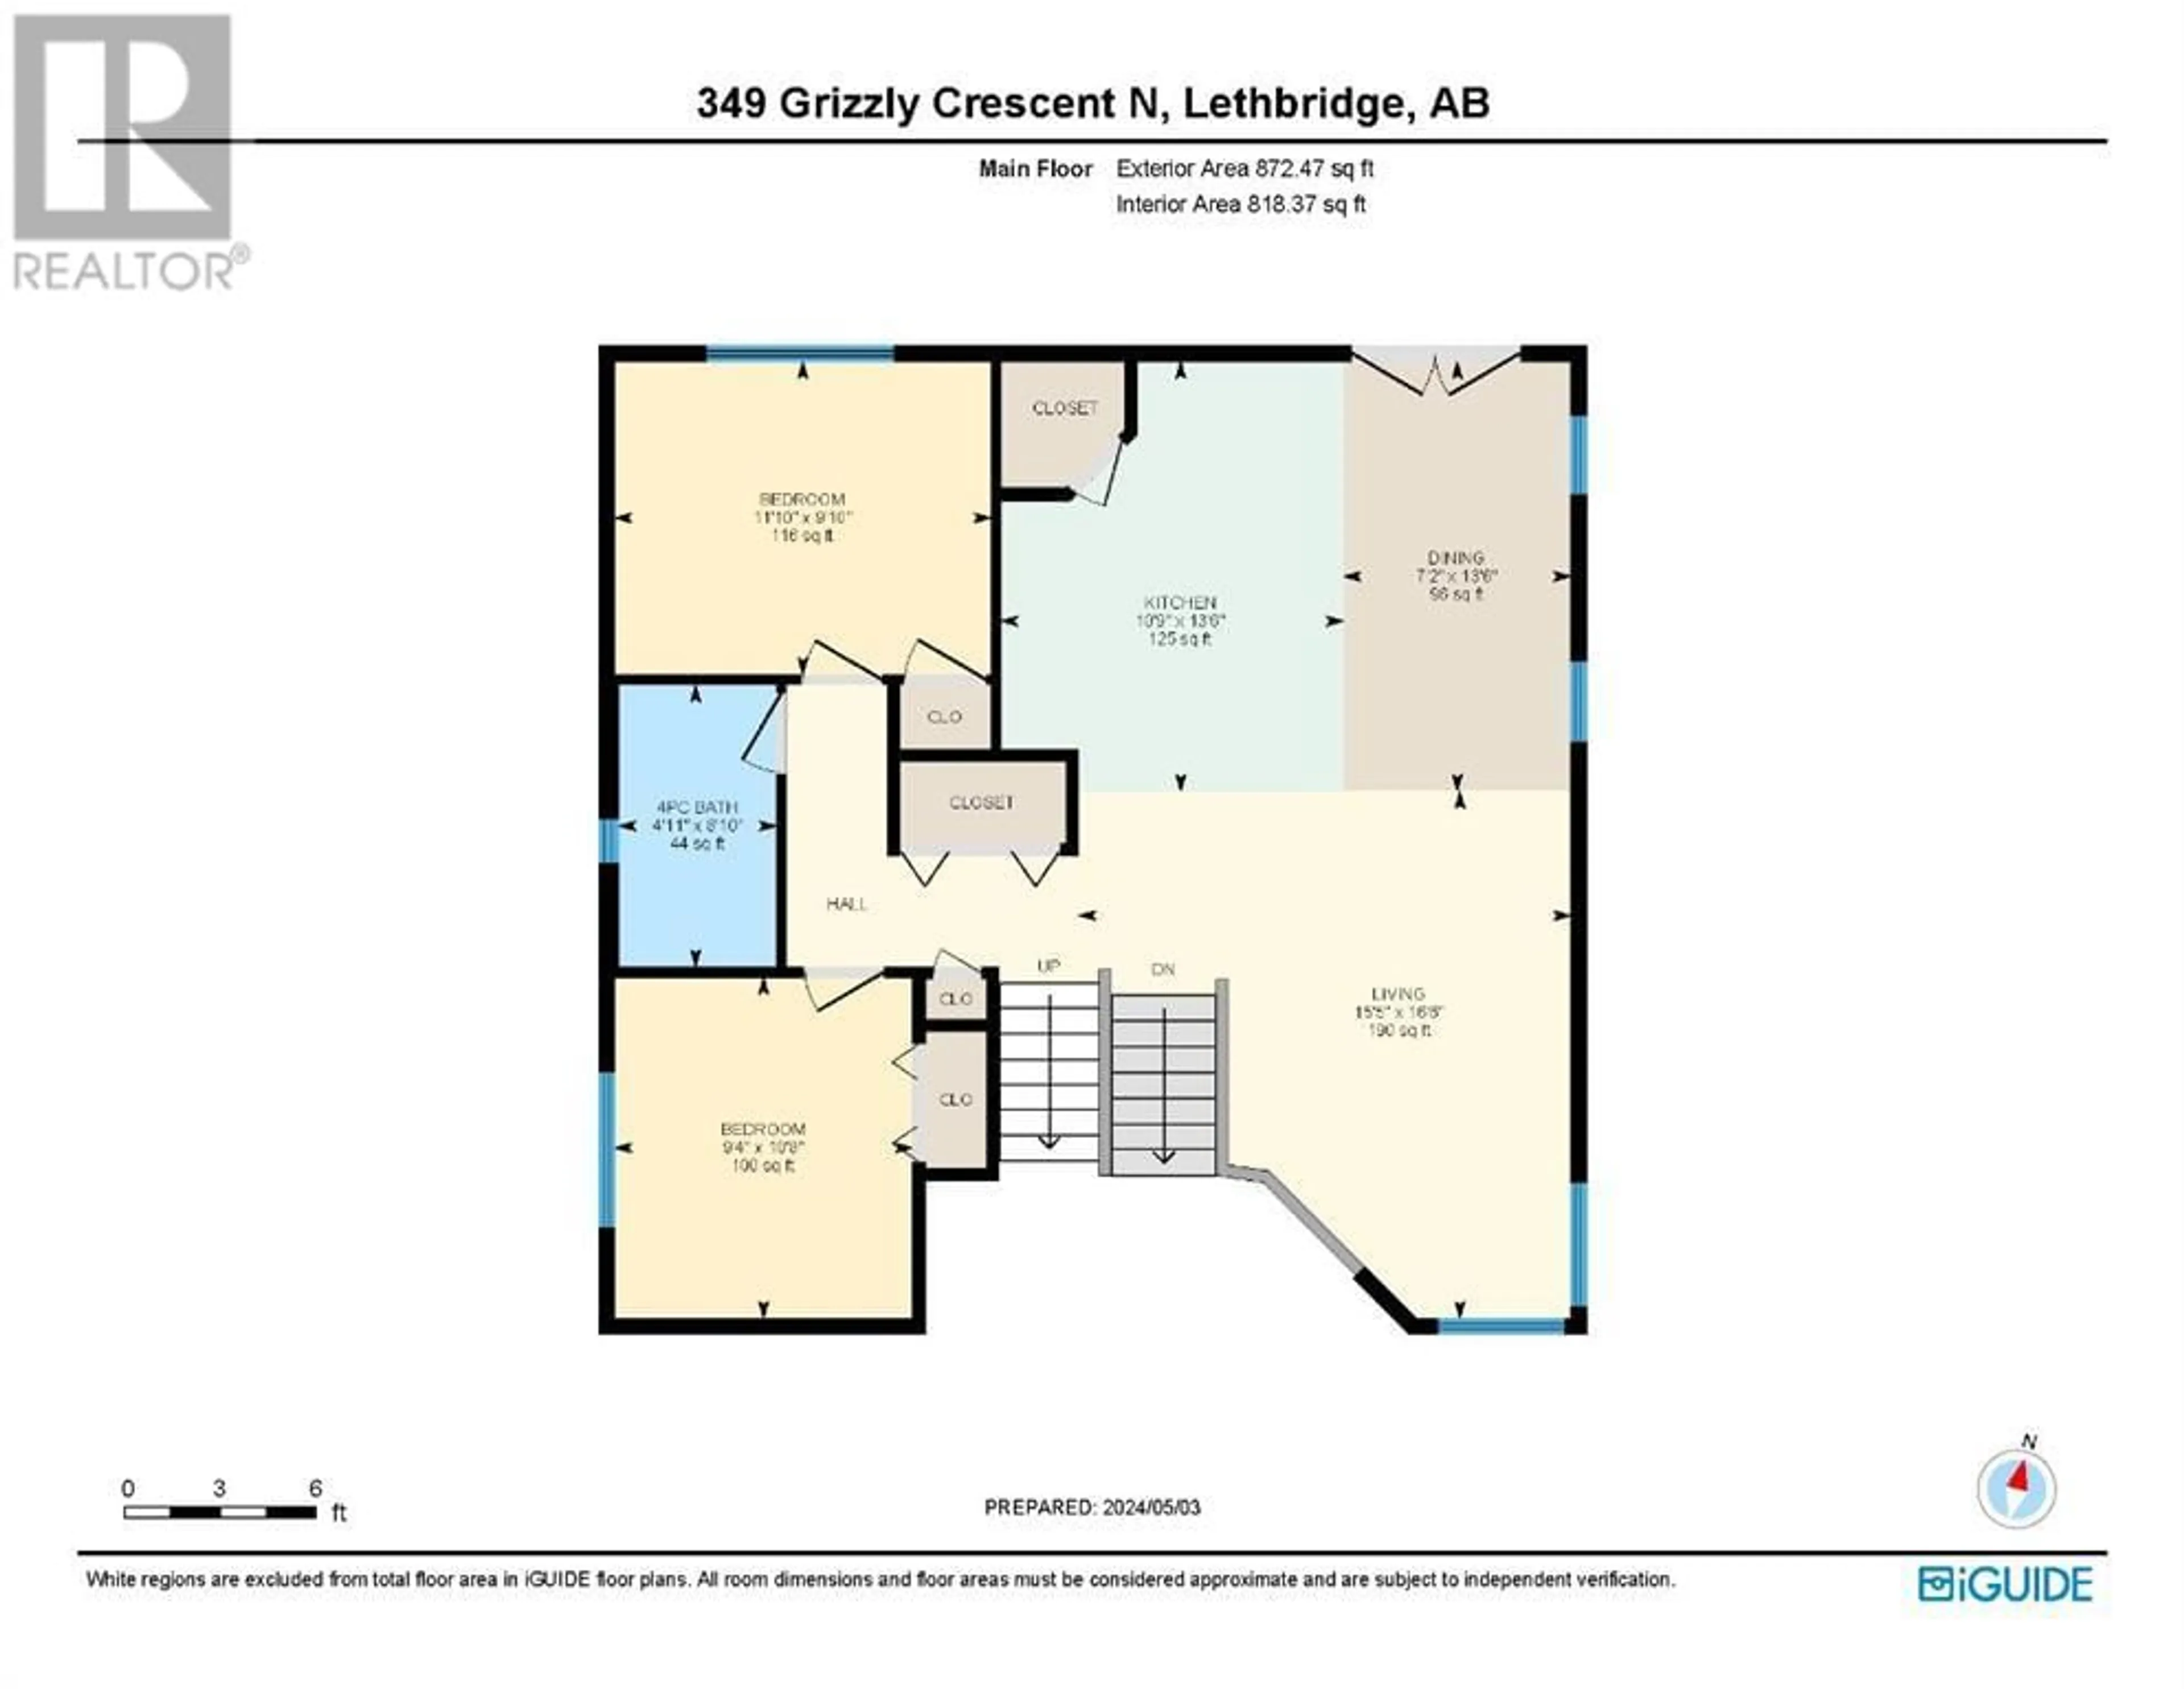 Floor plan for 349 Grizzly Crescent N, Lethbridge Alberta T1H4E6